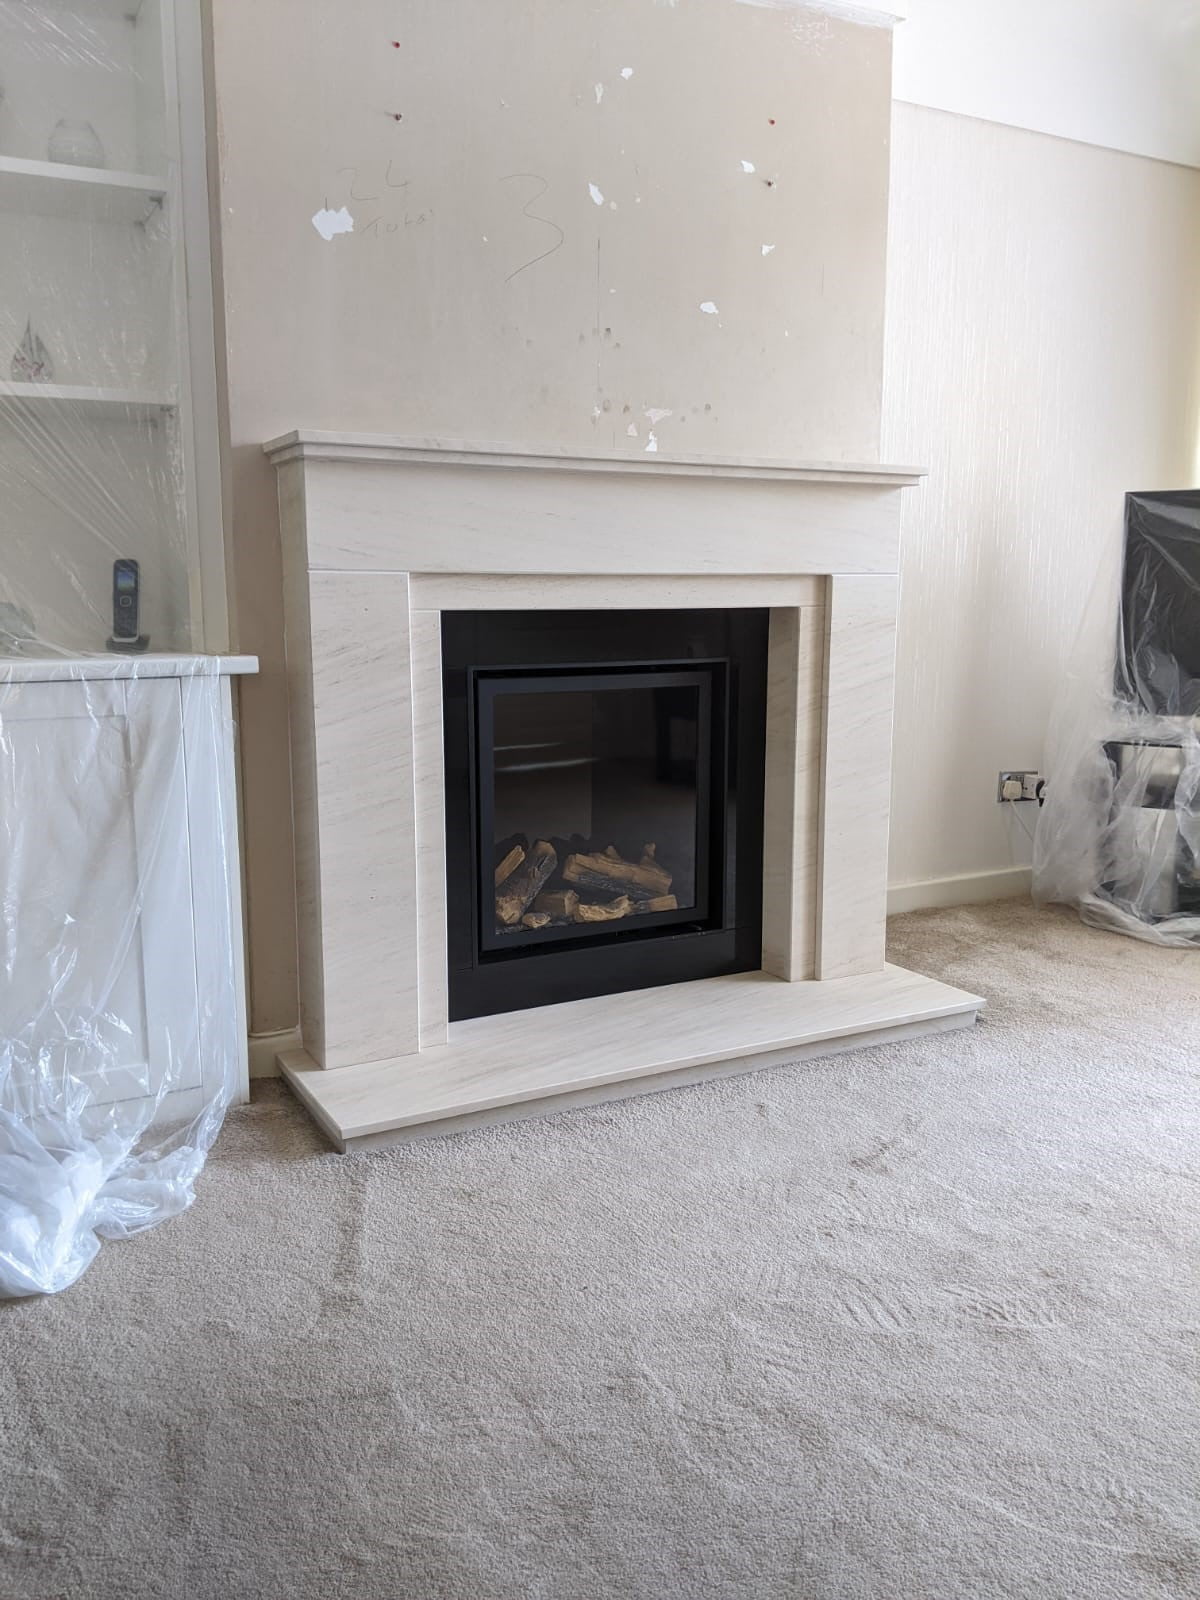 Alvanley Fireplace With Wildfire Ravel 600 Gas Fire Installed In Ellesmere Port